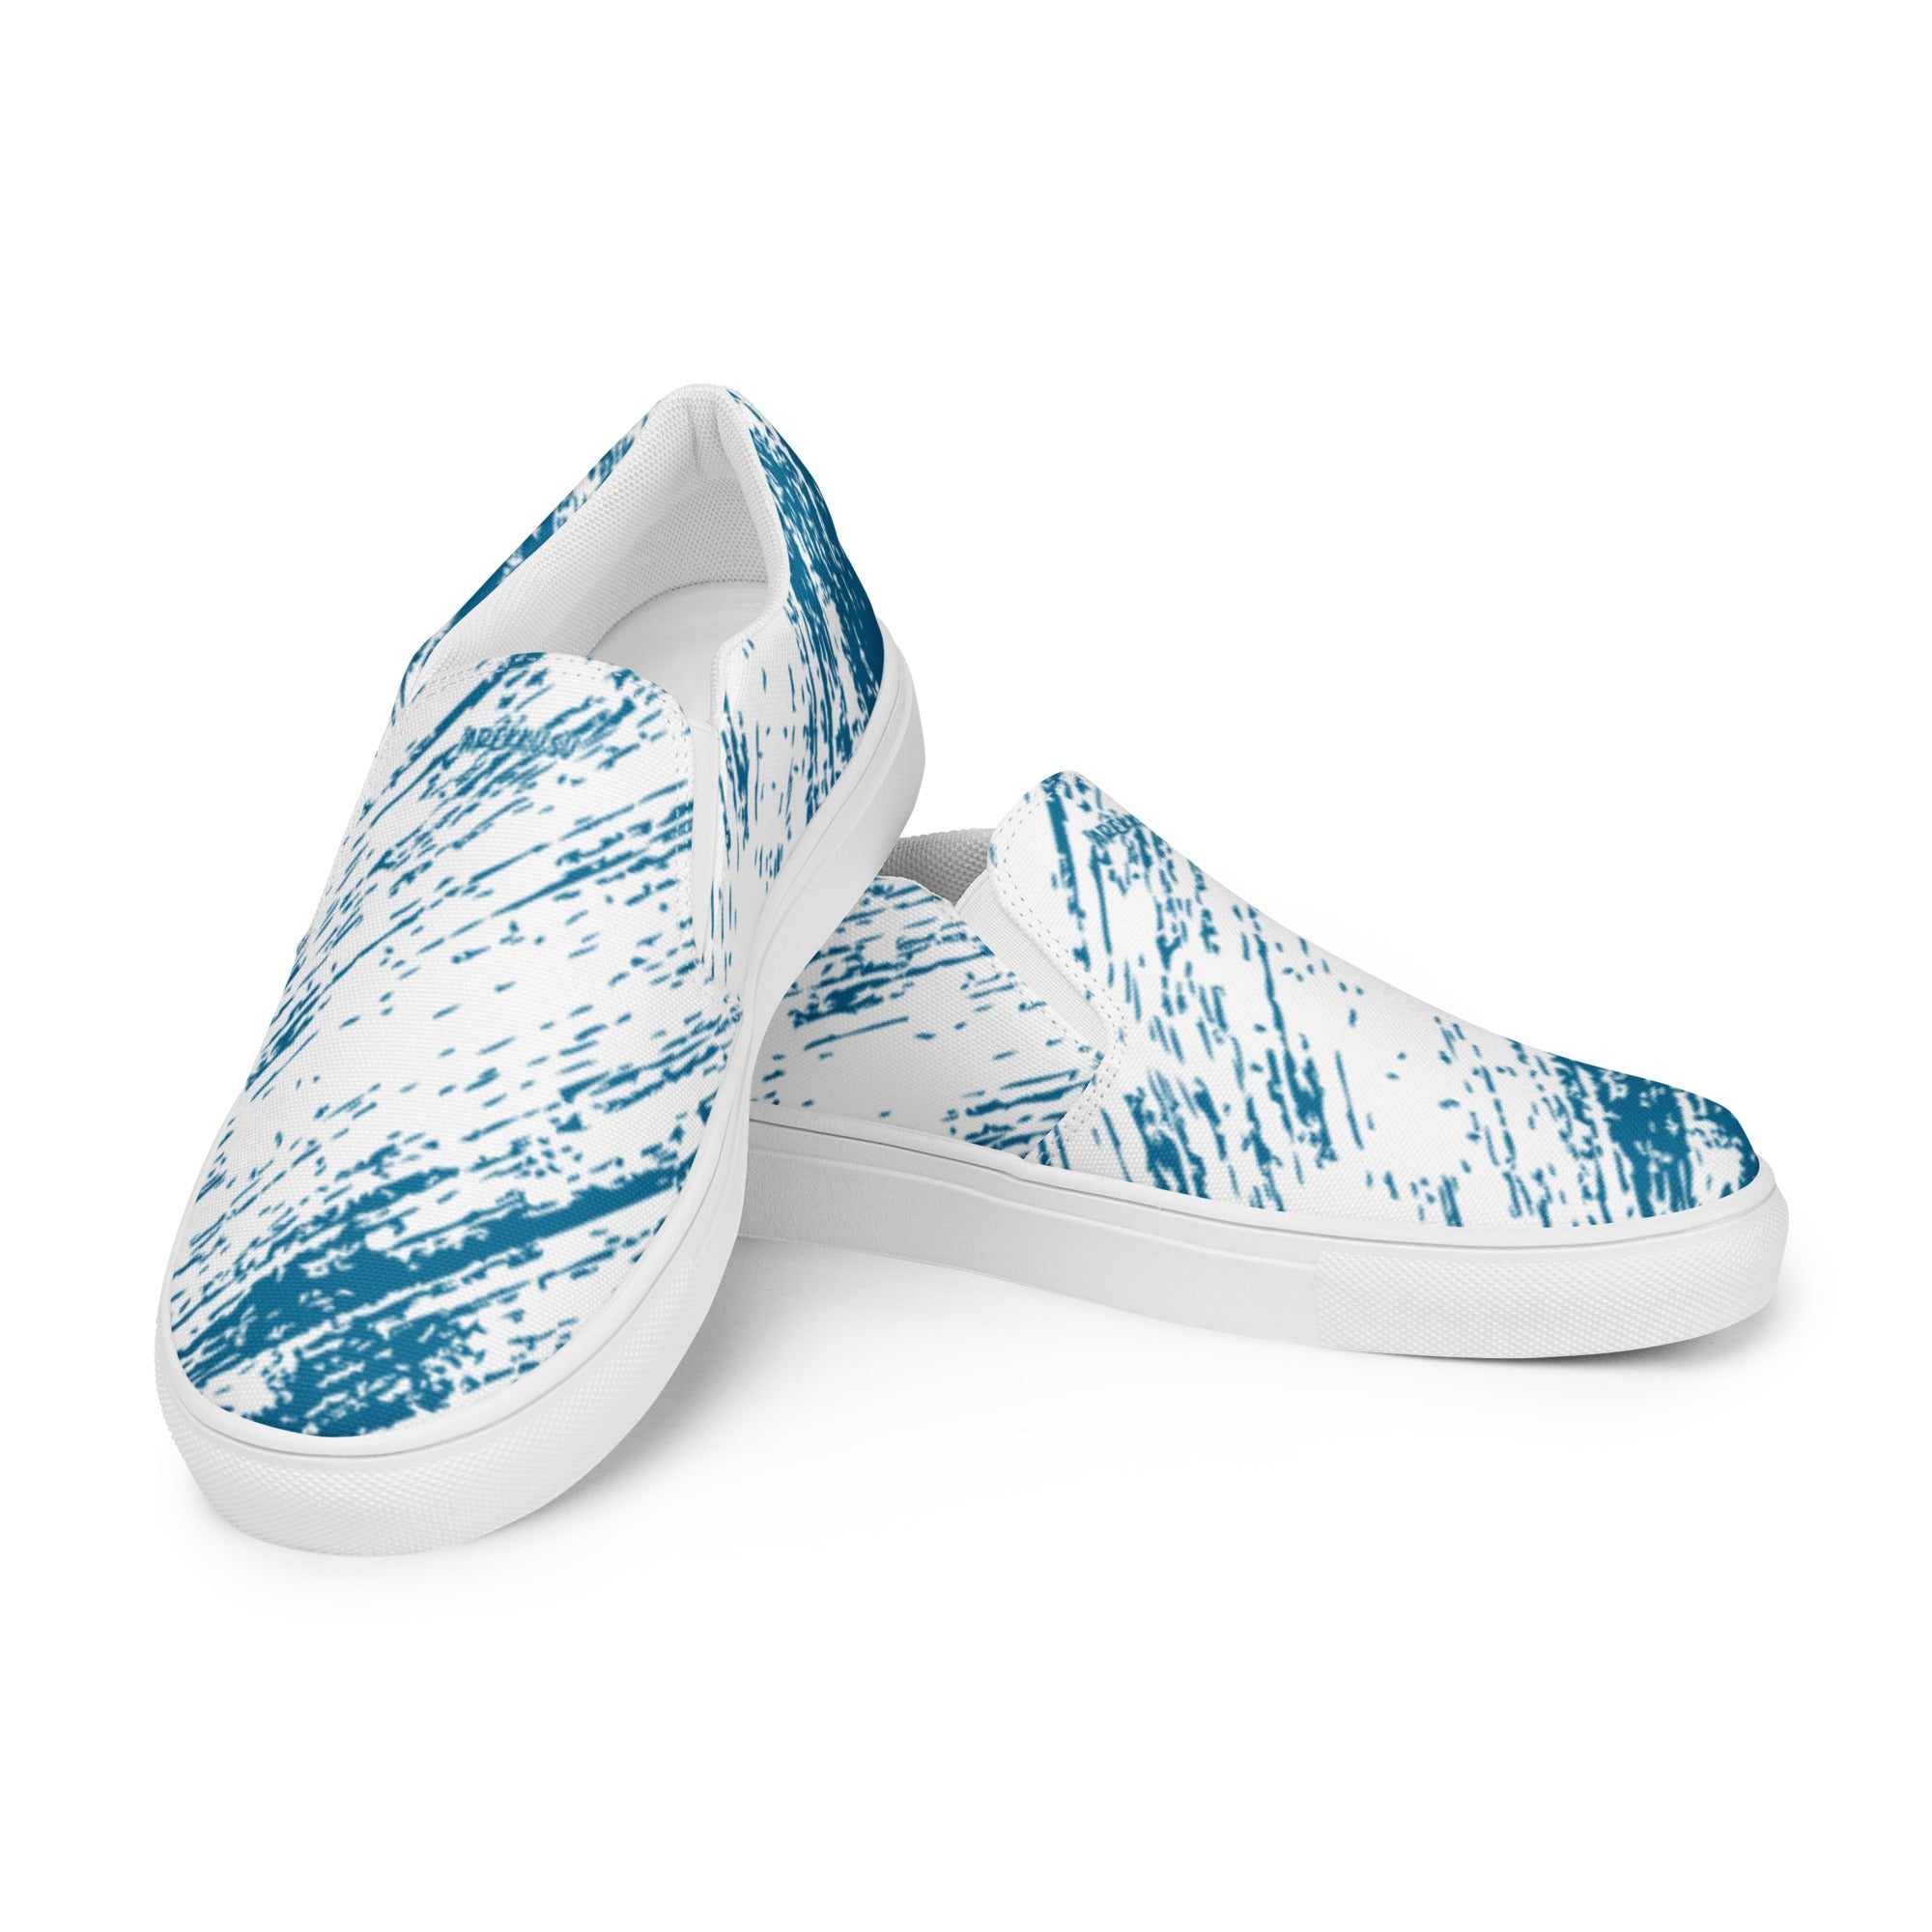 Gents' Slip-On Canvas Shoes